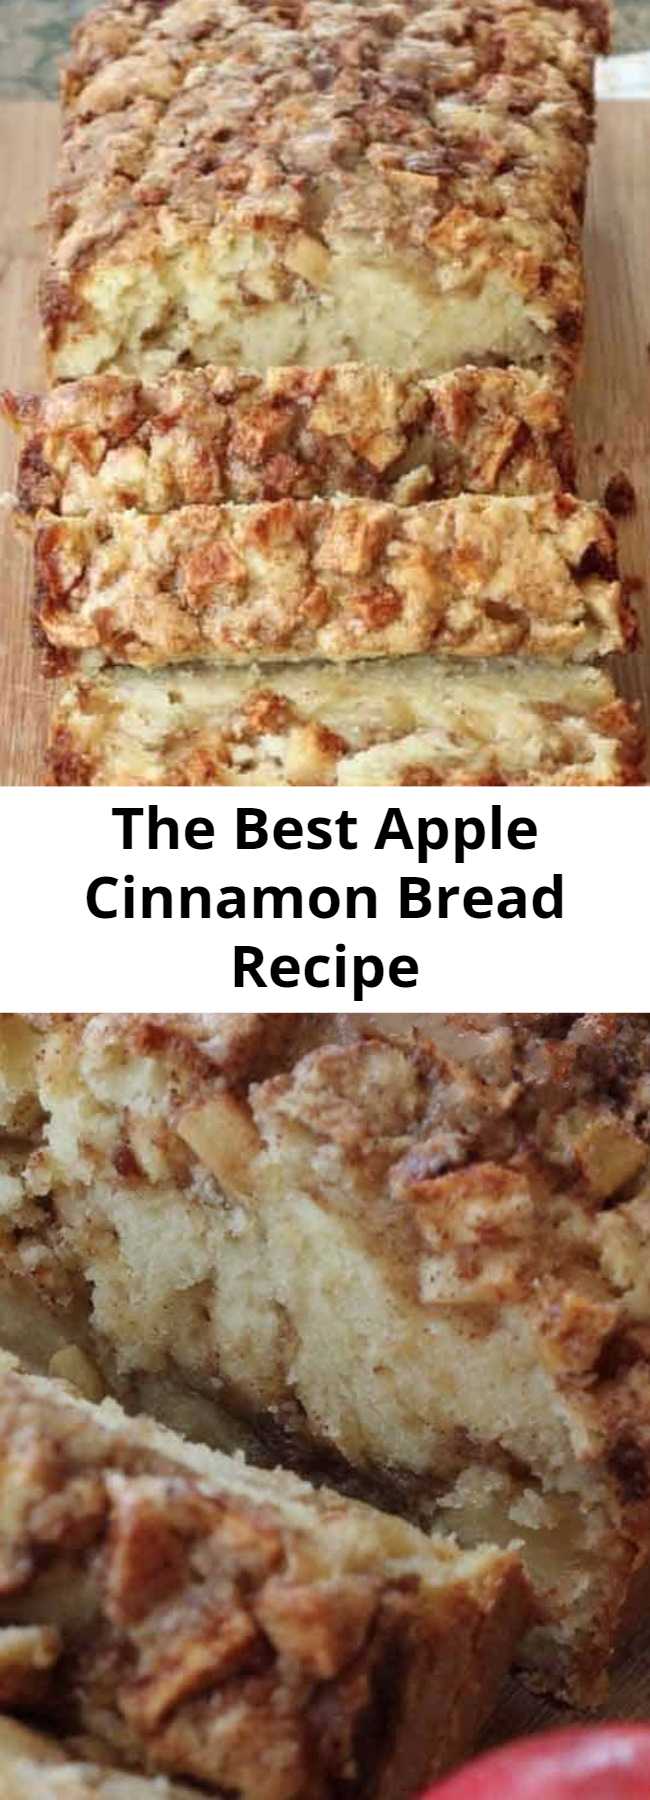 The Best Apple Cinnamon Bread Recipe - This is the absolute BEST Apple Bread on the internet. Swirled with cinnamon sugar and juicy apple pieces, try this Apple Bread recipe out and see why it has over 250 amazing reviews!